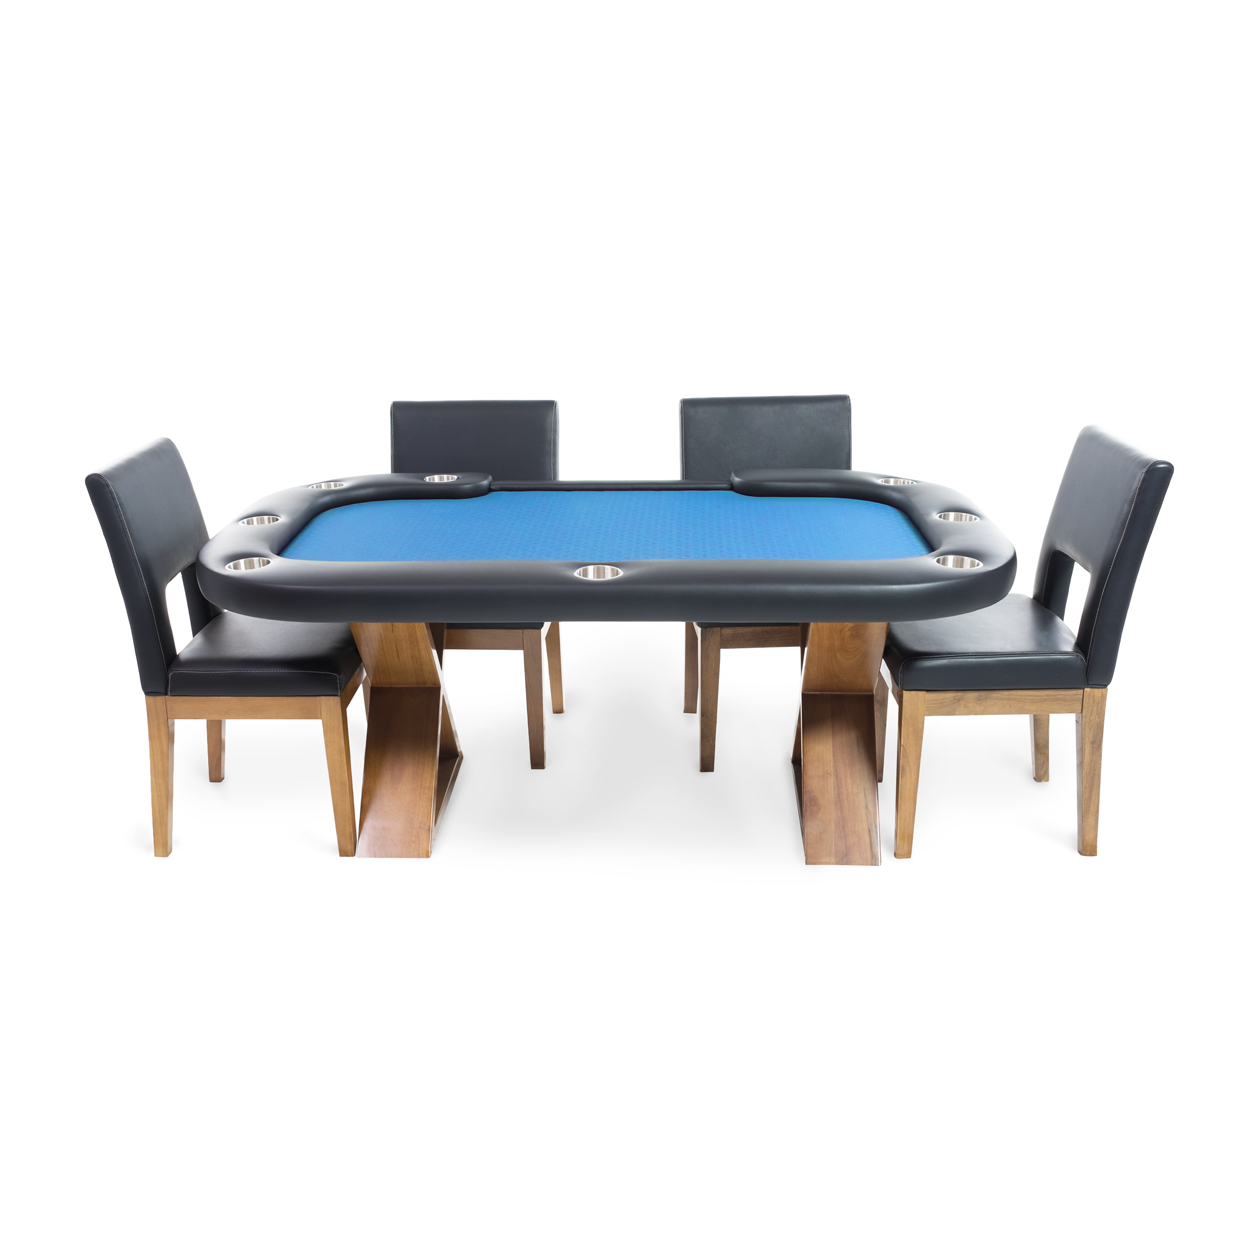 BBO Helmsley Poker Table Dealers Cut Blue and Chairs